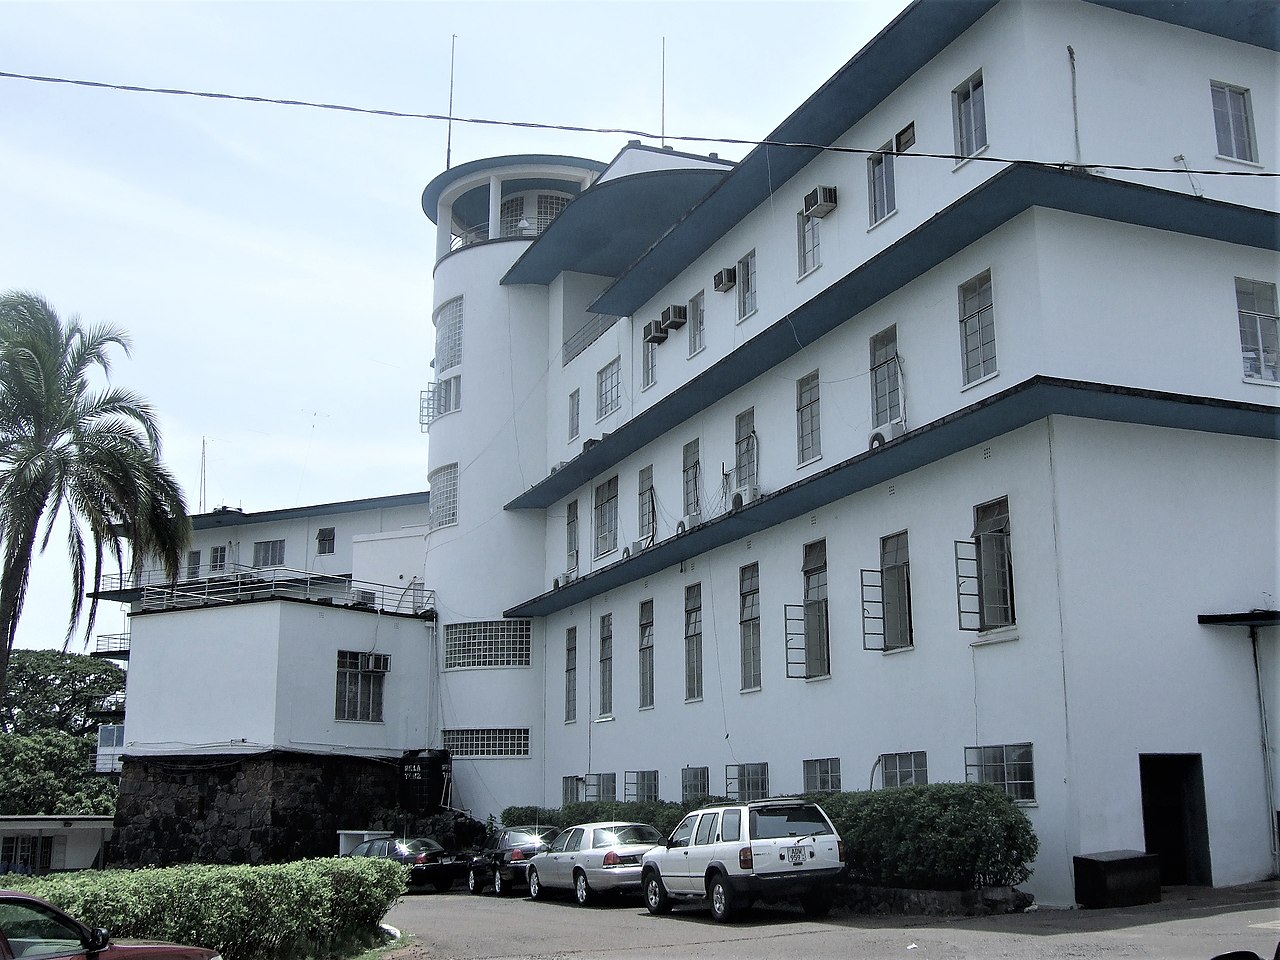 The statehouse in Freetown, Sierra Leone. Photo credit: The Extractive Industries Transparency Initiative